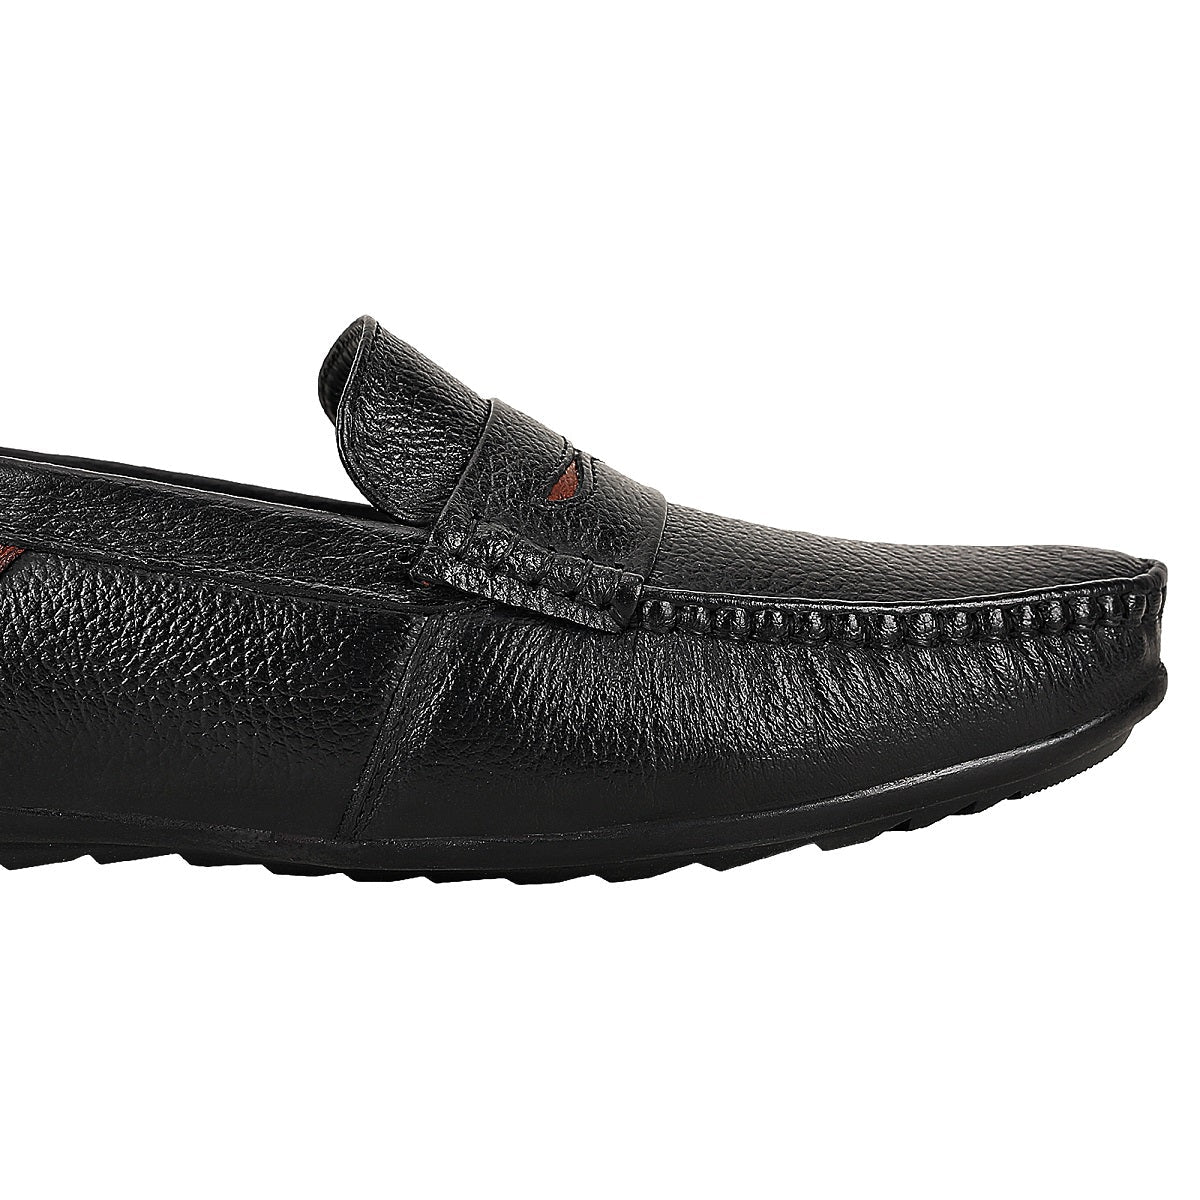 SeeandWear Leather Loafers for Men- Defective